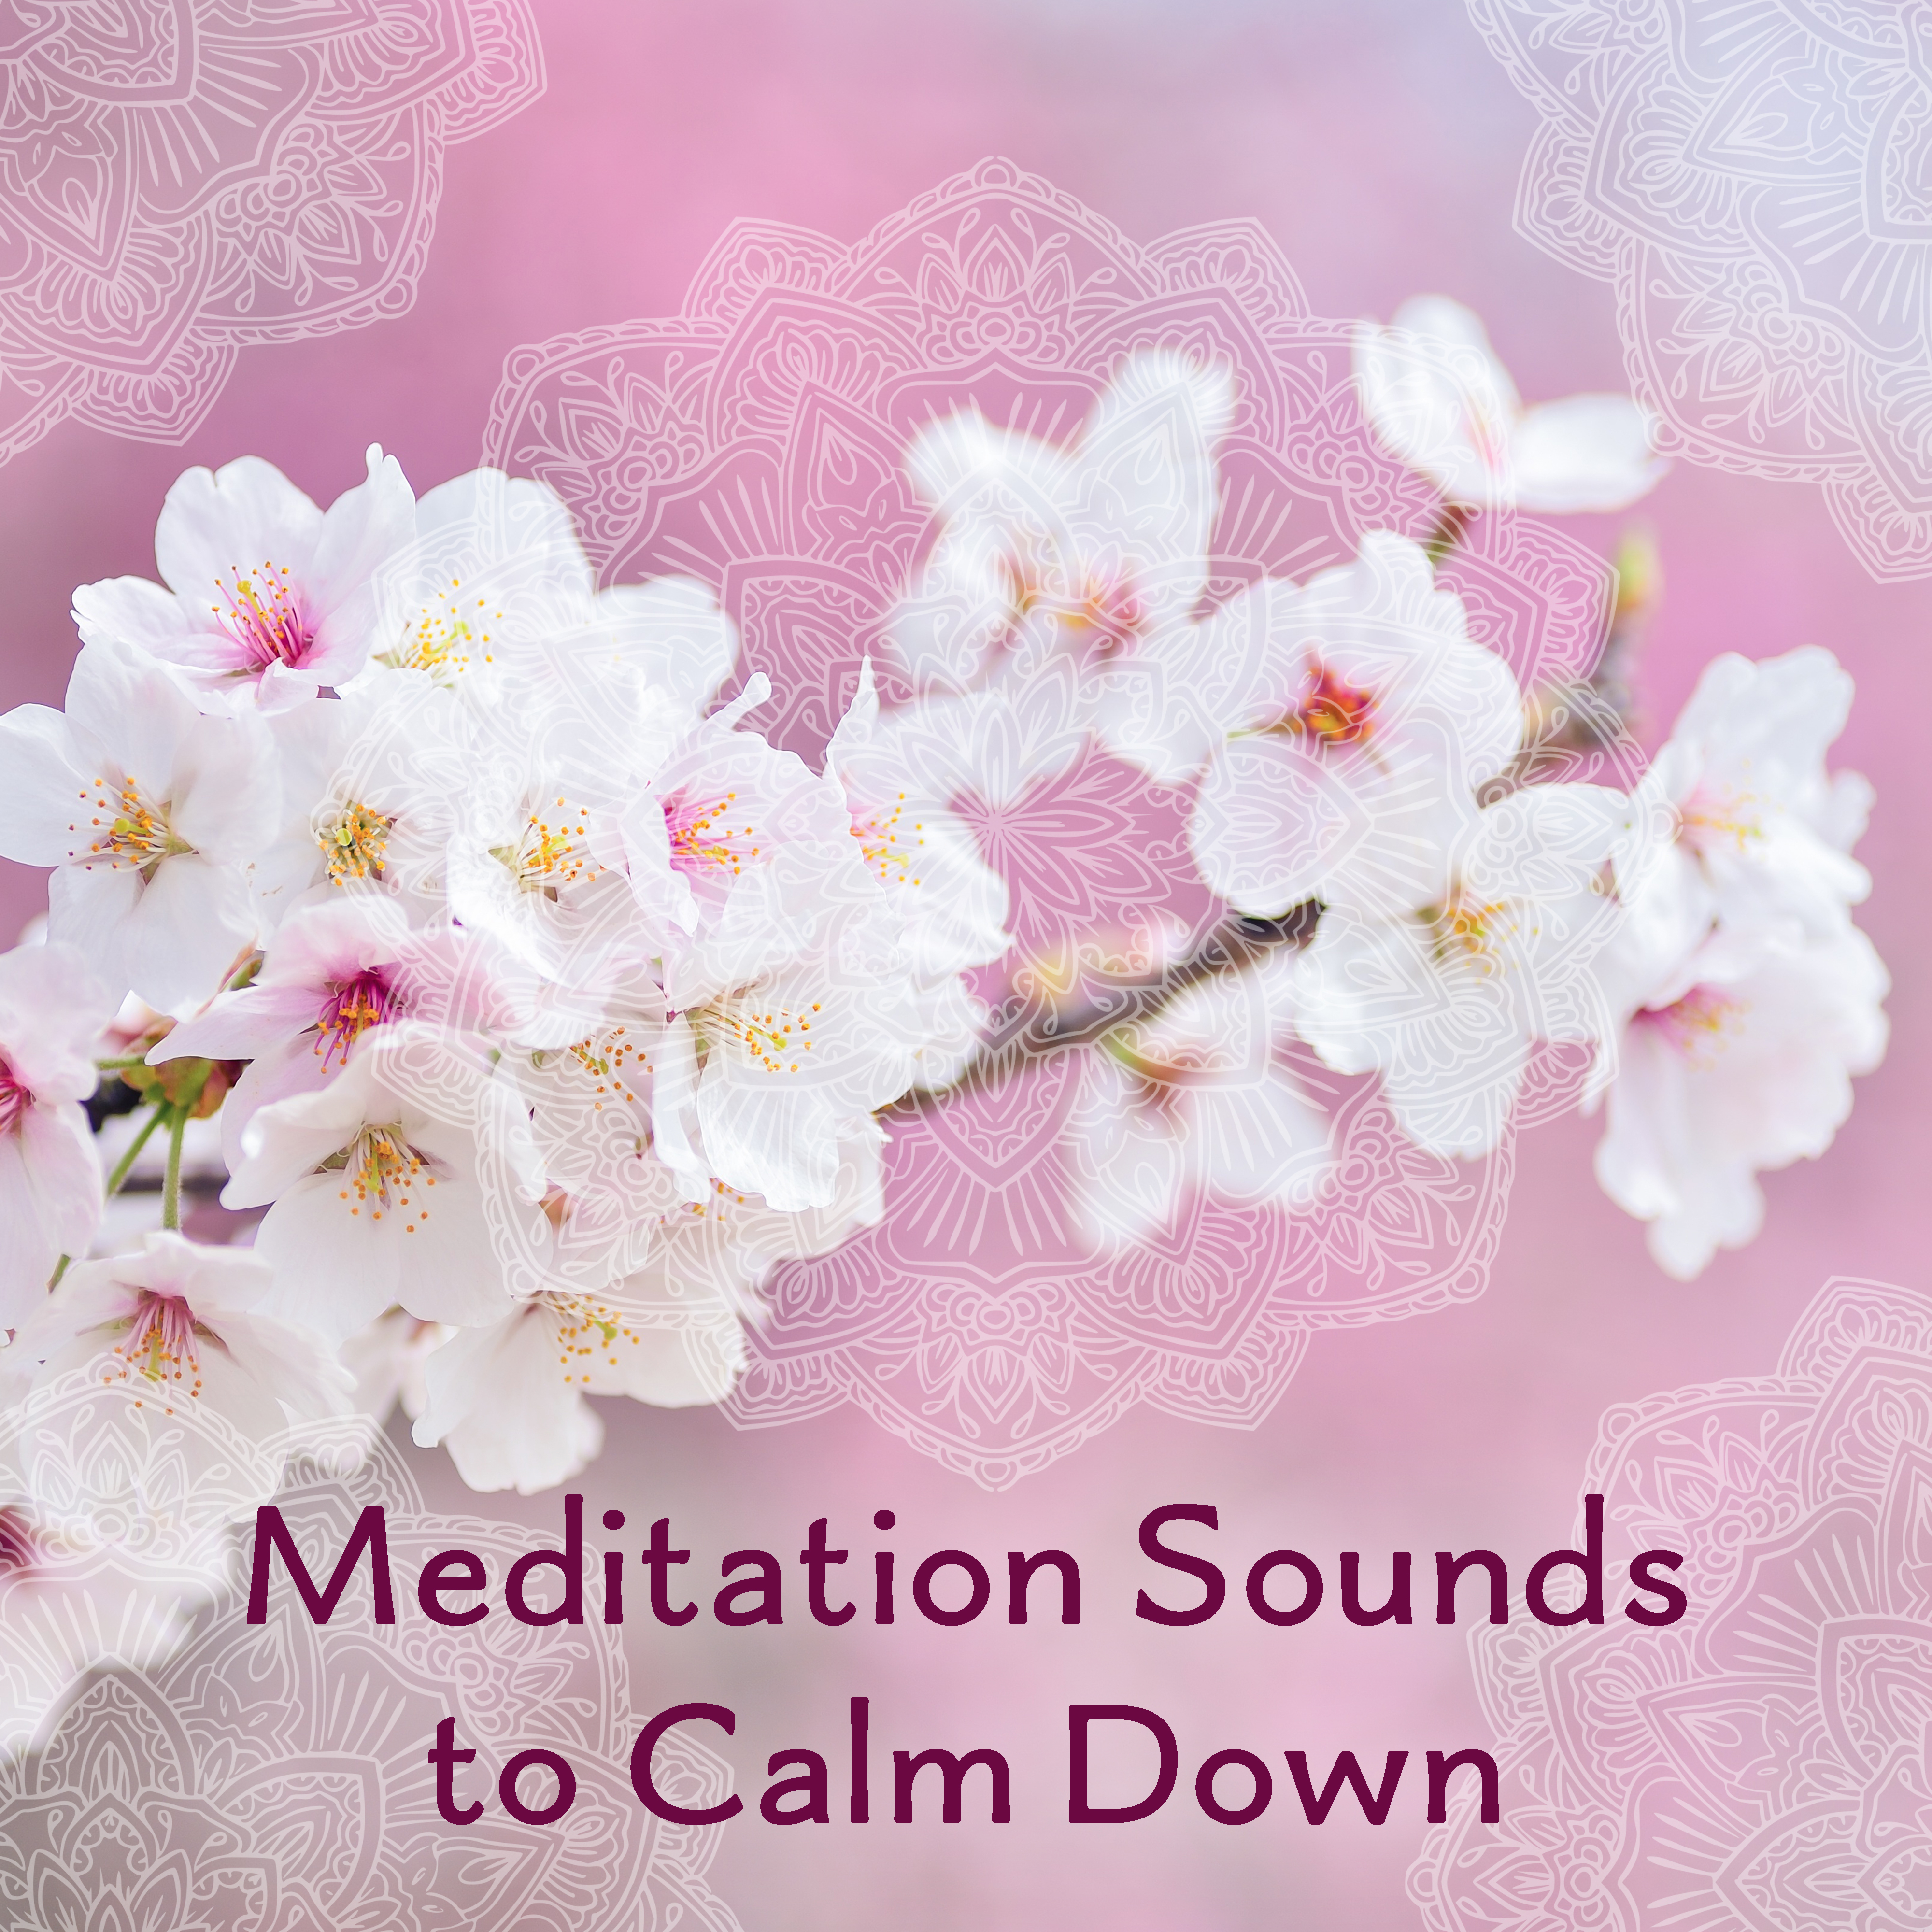 Meditation Sounds to Calm Down  Sounds for Inner Calmness, Peaceful Mind, Body Relaxation, Spiritual Journey